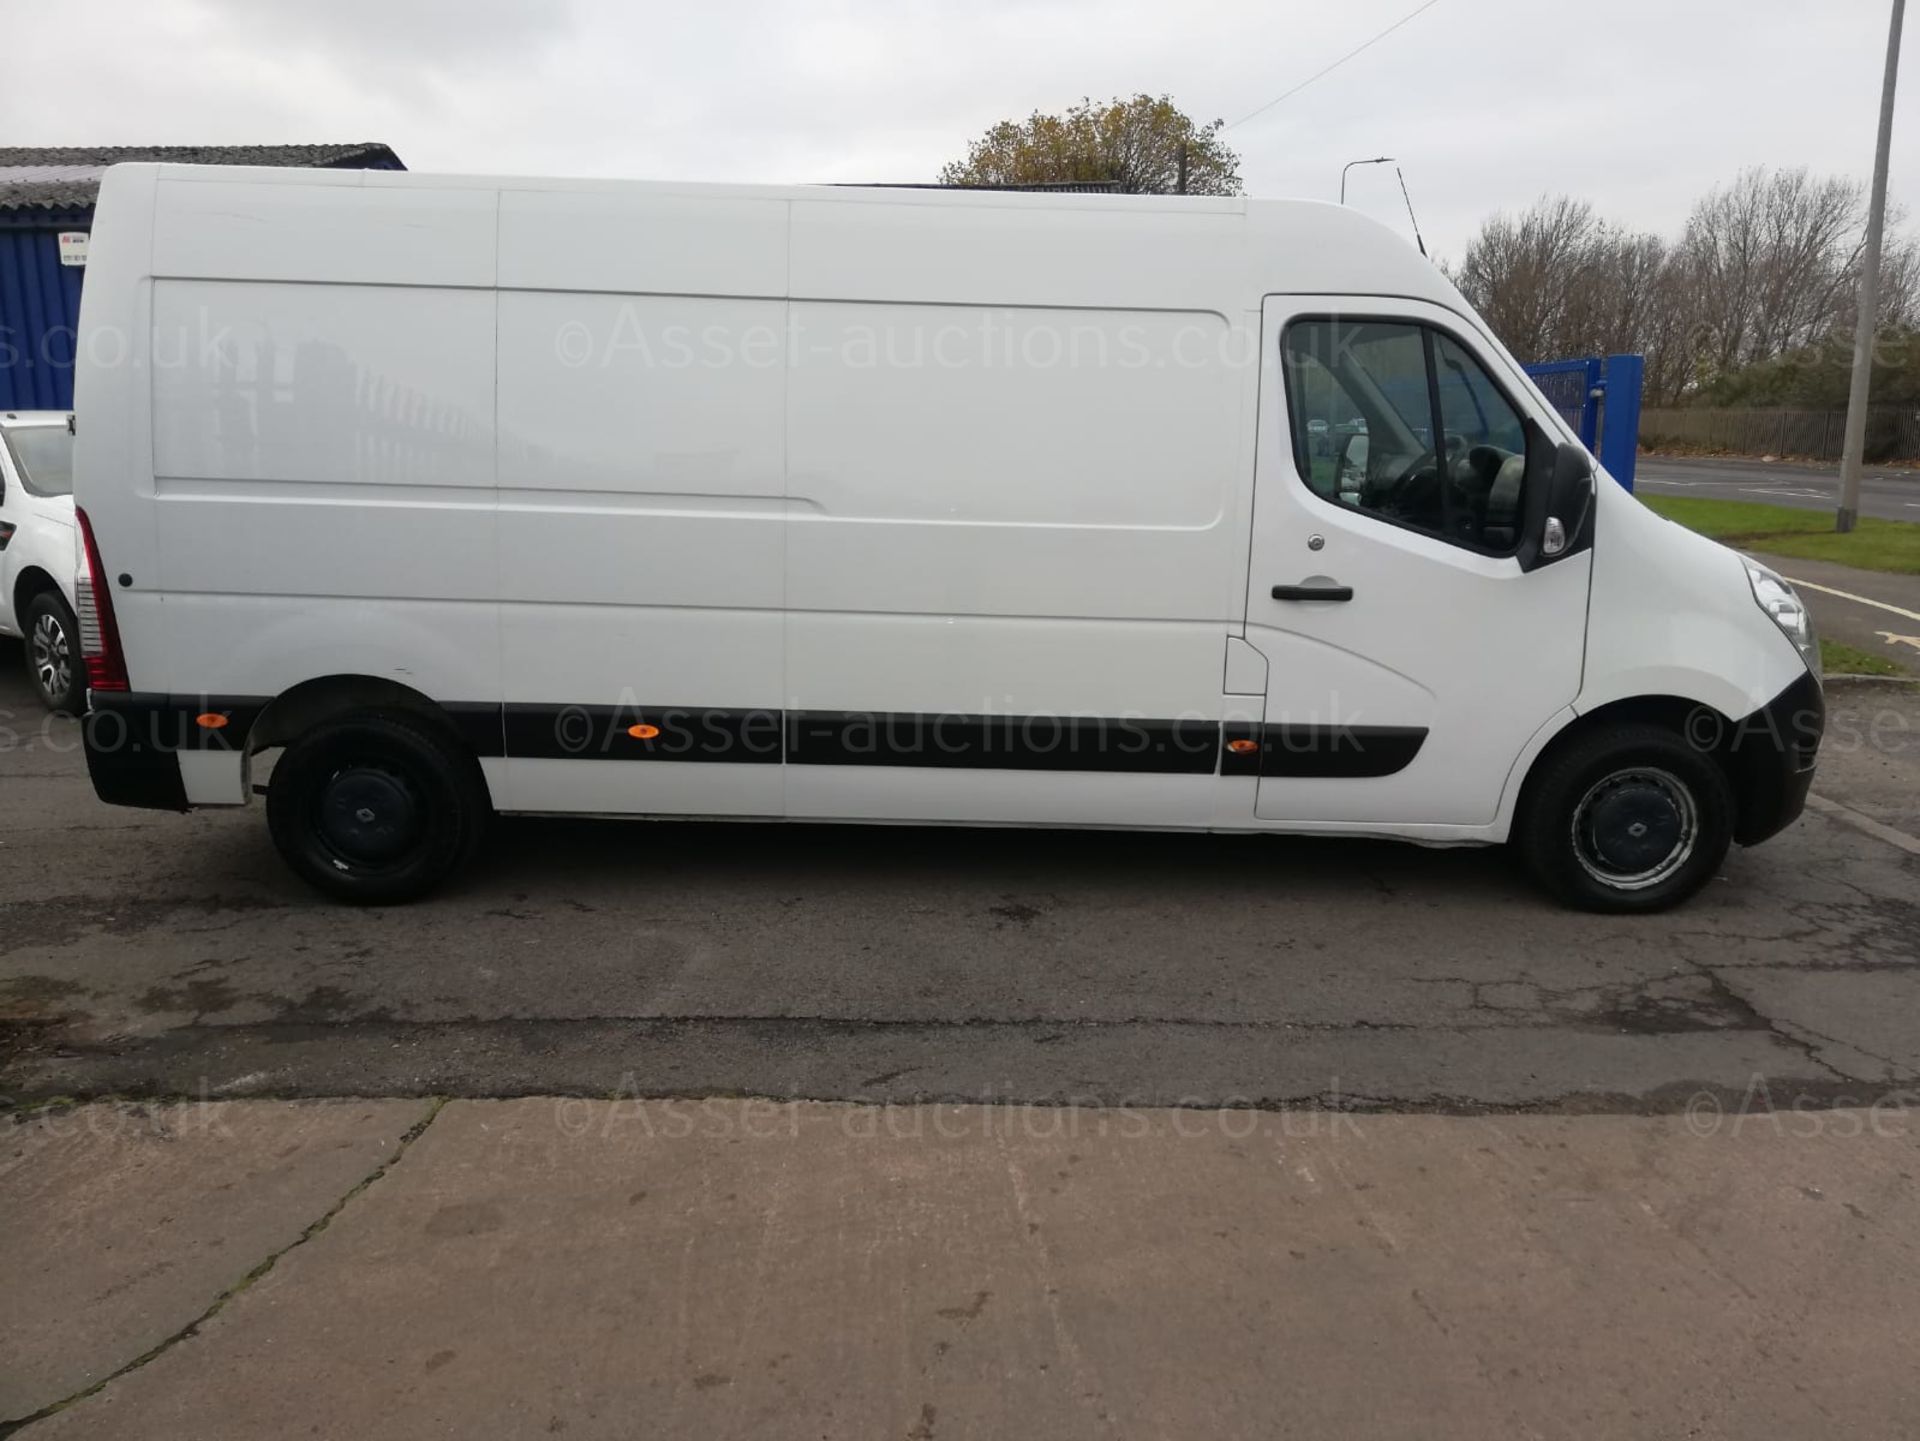 2017/17 RENAULT MASTER LM35 BUSINESS DCI L3H2 WHITE PANEL VAN, 106K MILES WITH SERVICE HISTORY - Image 7 of 9